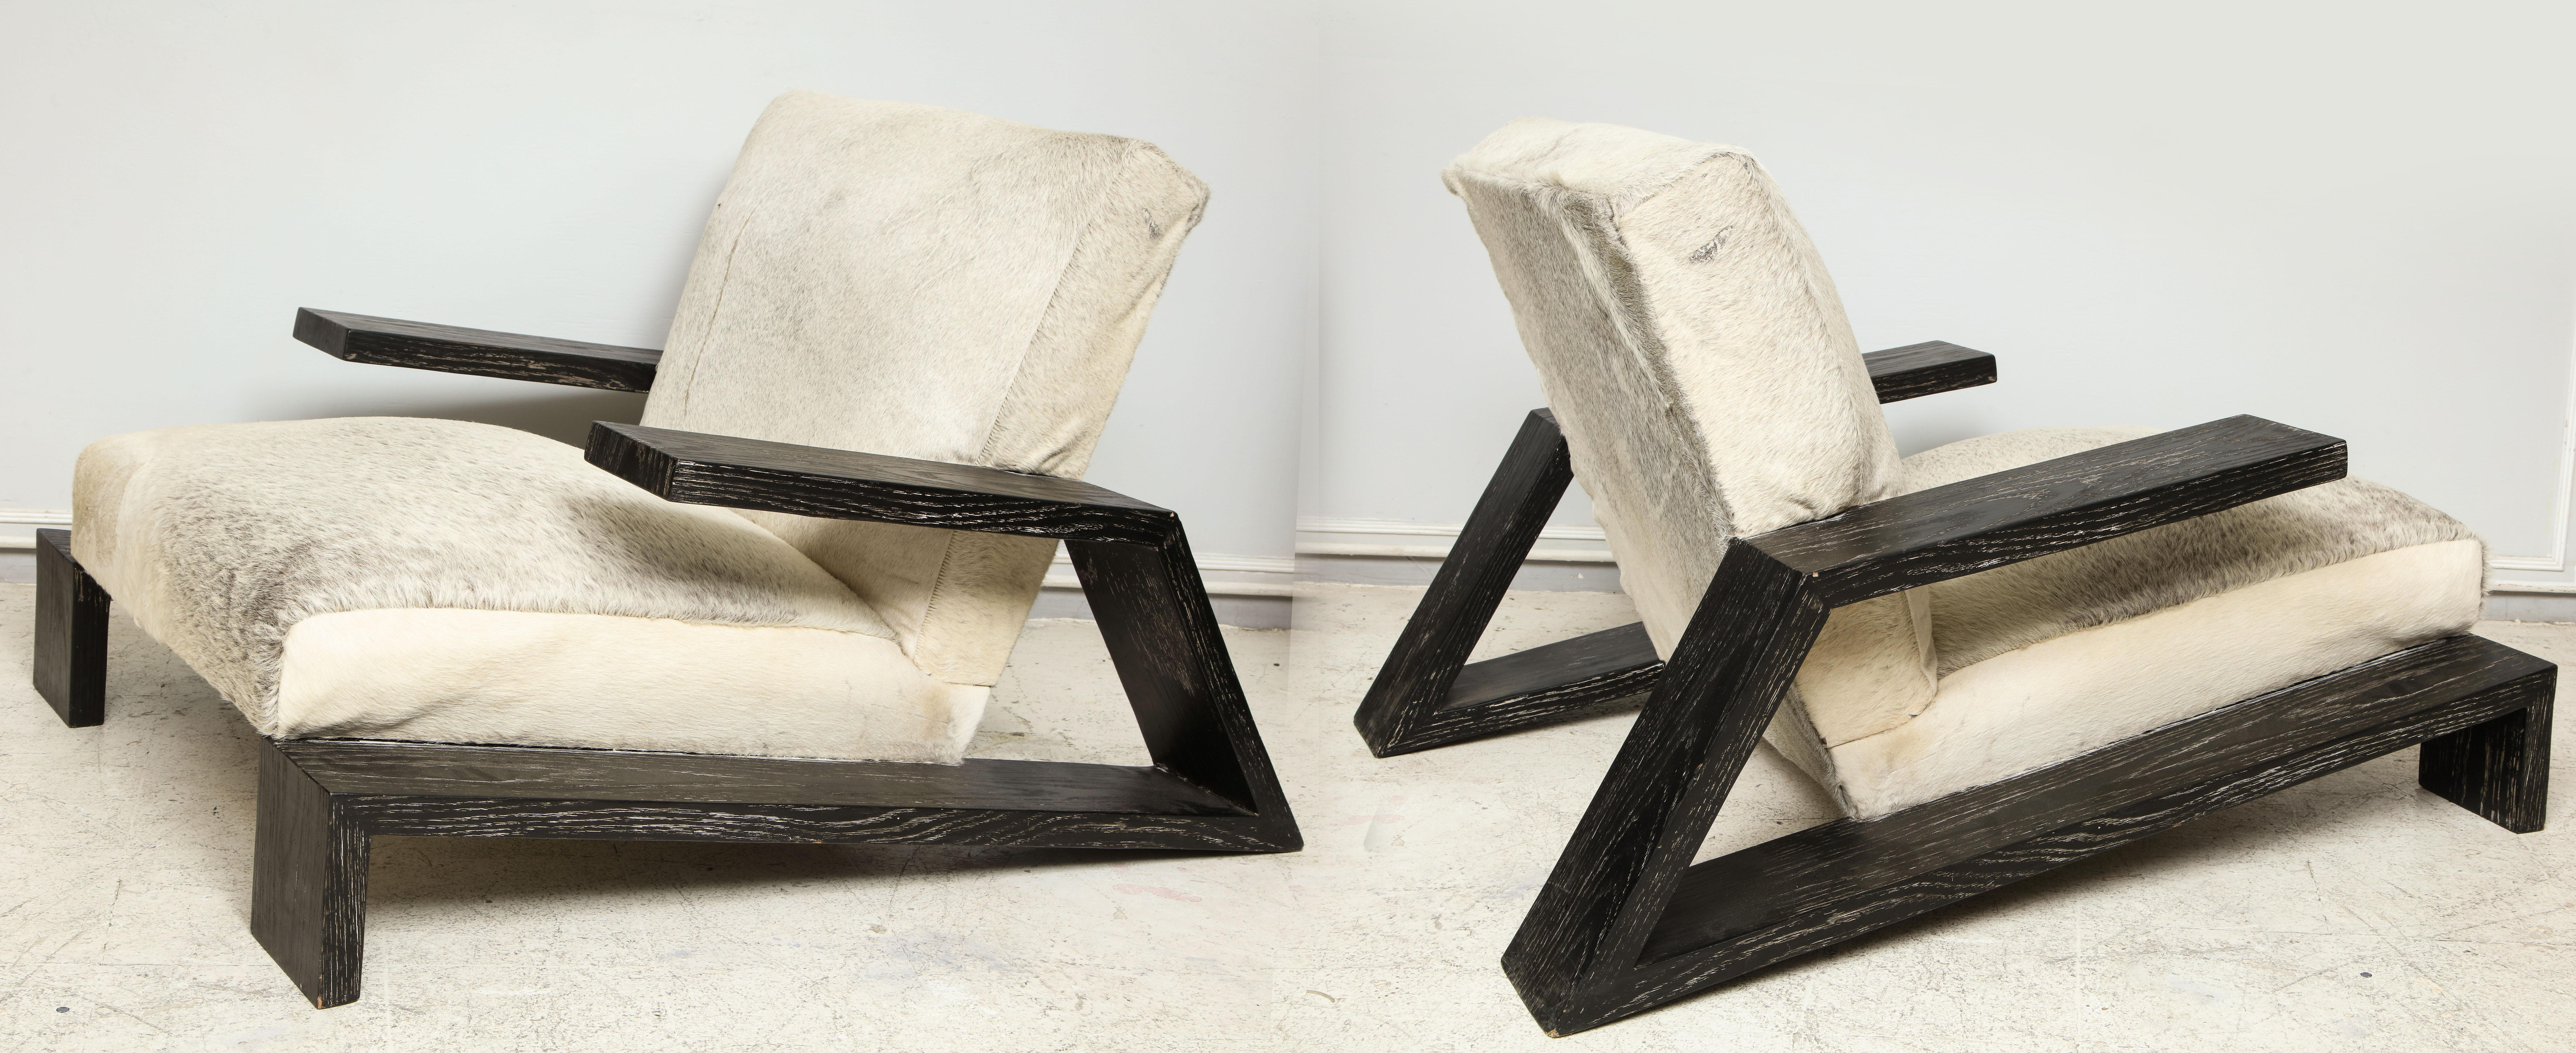 Pair of Jean-Michel Frank style cerused oak lounge chairs upholstered in cowhide.